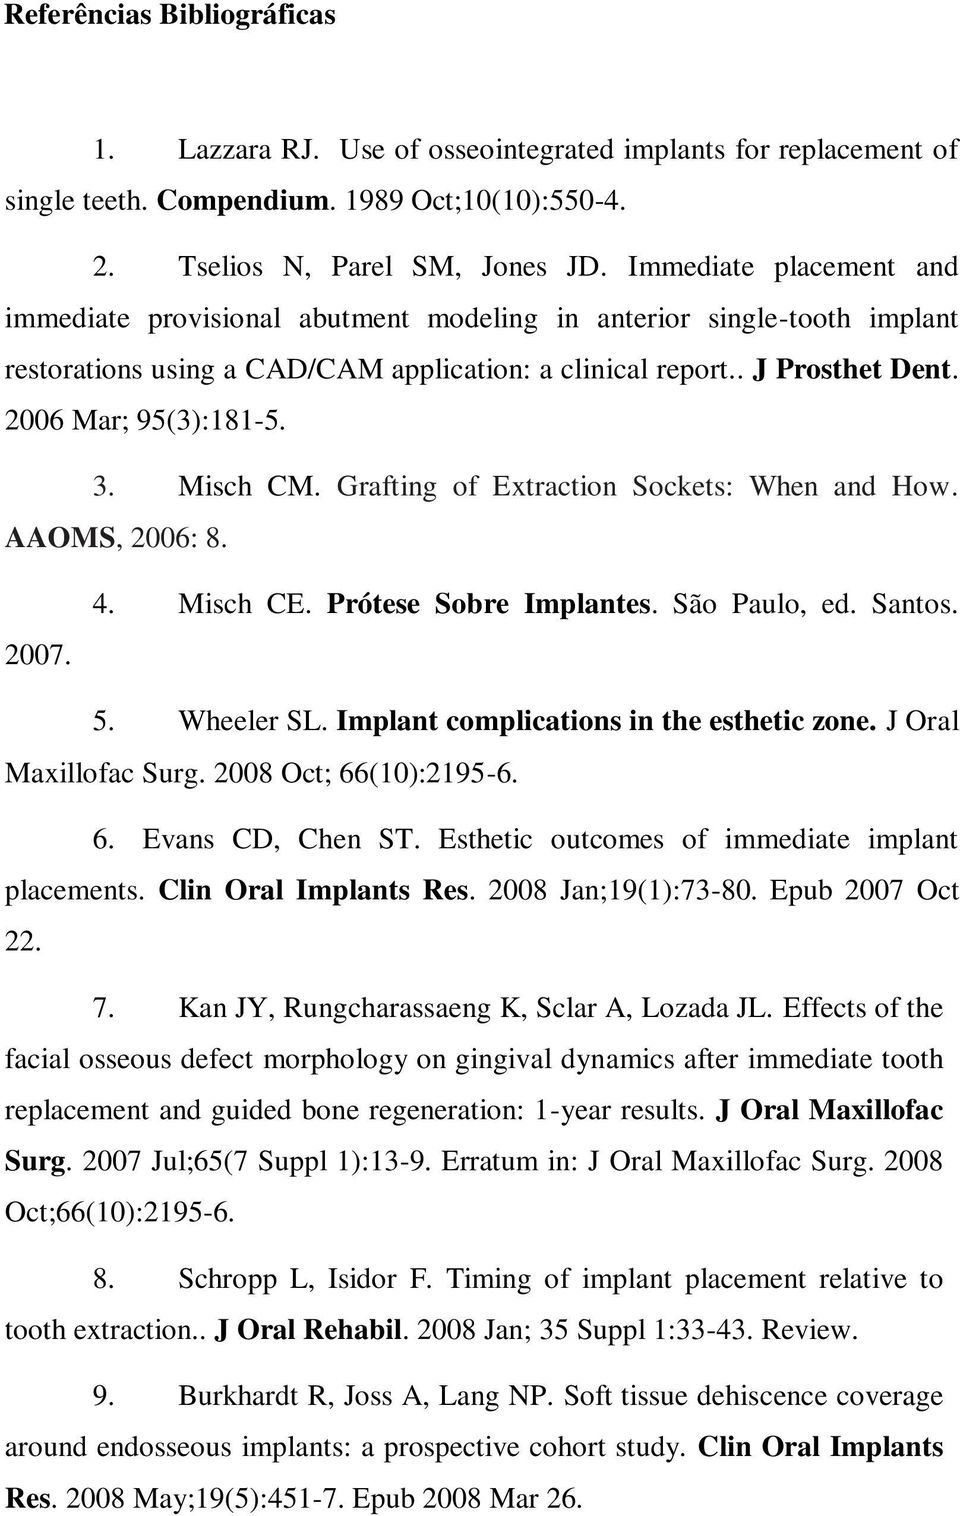 3. Misch CM. Grafting of Extraction Sockets: When and How. AAOMS, 2006: 8. 2007. 4. Misch CE. Prótese Sobre Implantes. São Paulo, ed. Santos. 5. Wheeler SL. Implant complications in the esthetic zone.